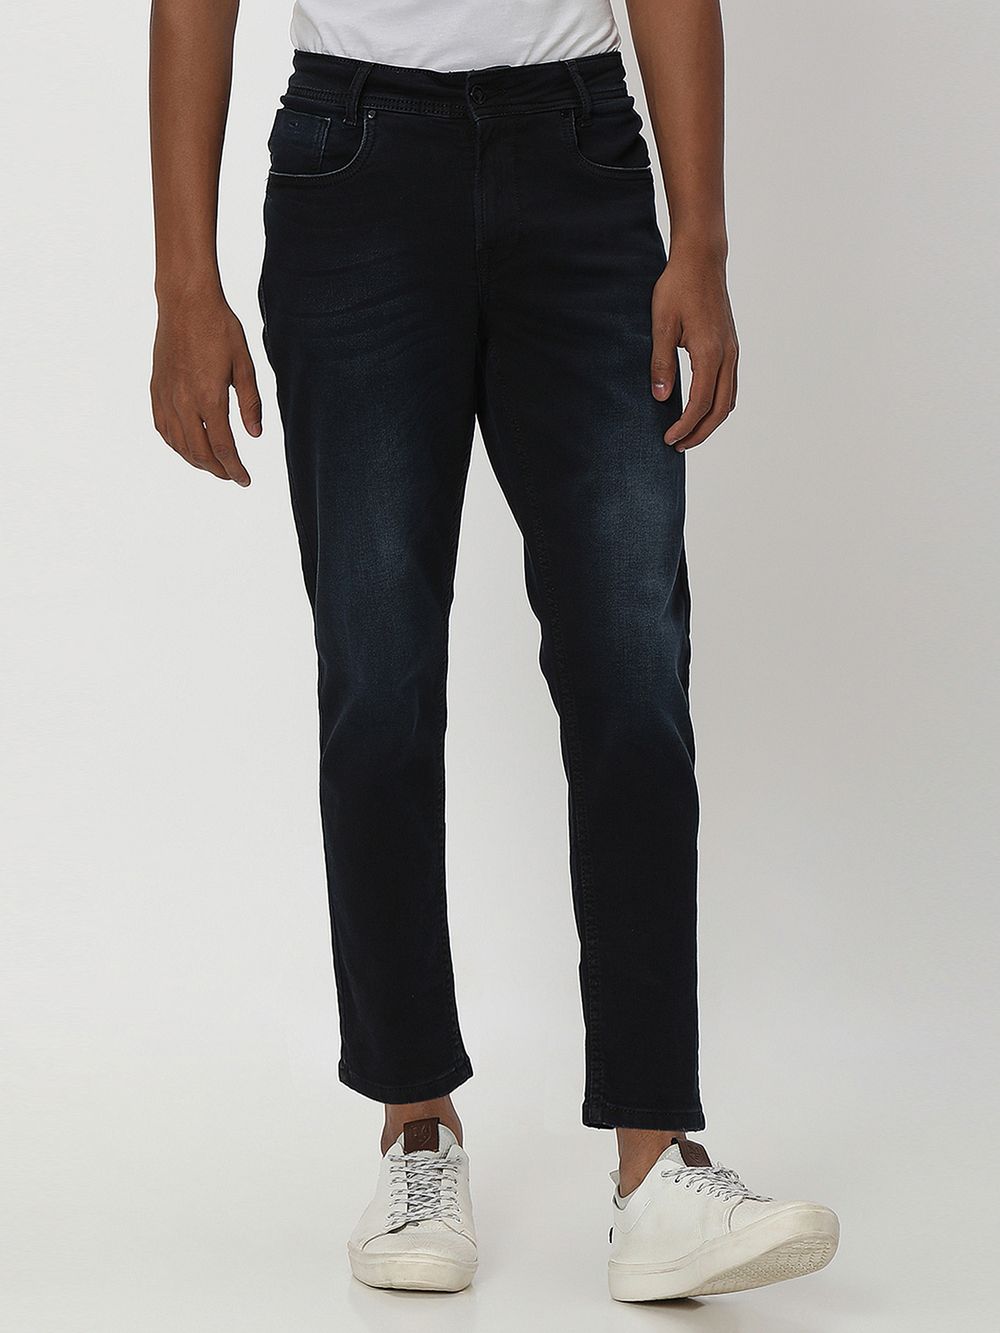 Blue Black Ankle Length Flyweight Jeans